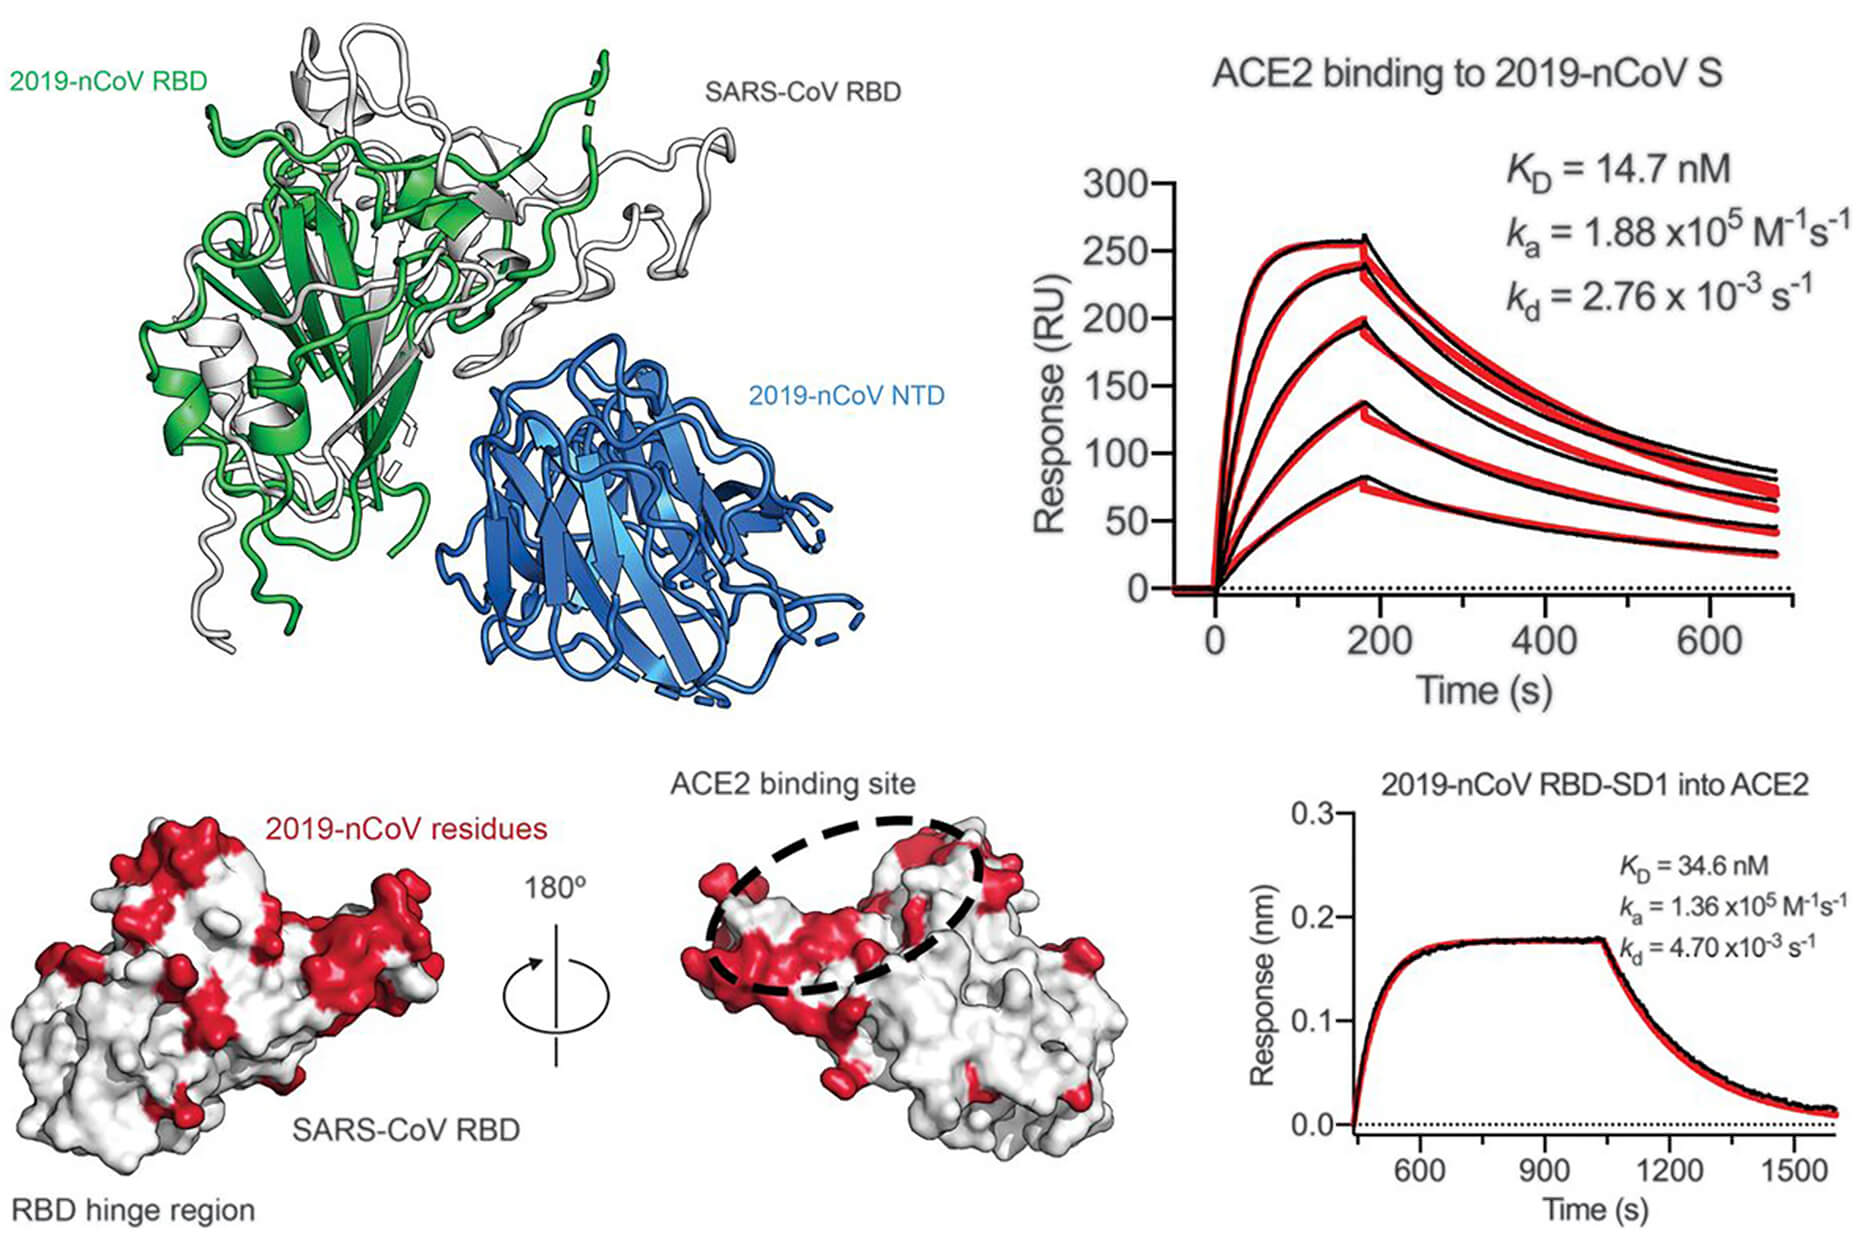 Biophysical assays show 2019-nCoV S binds ACE2 with high-affinity via the 2019-nCoV RBD-SD1.